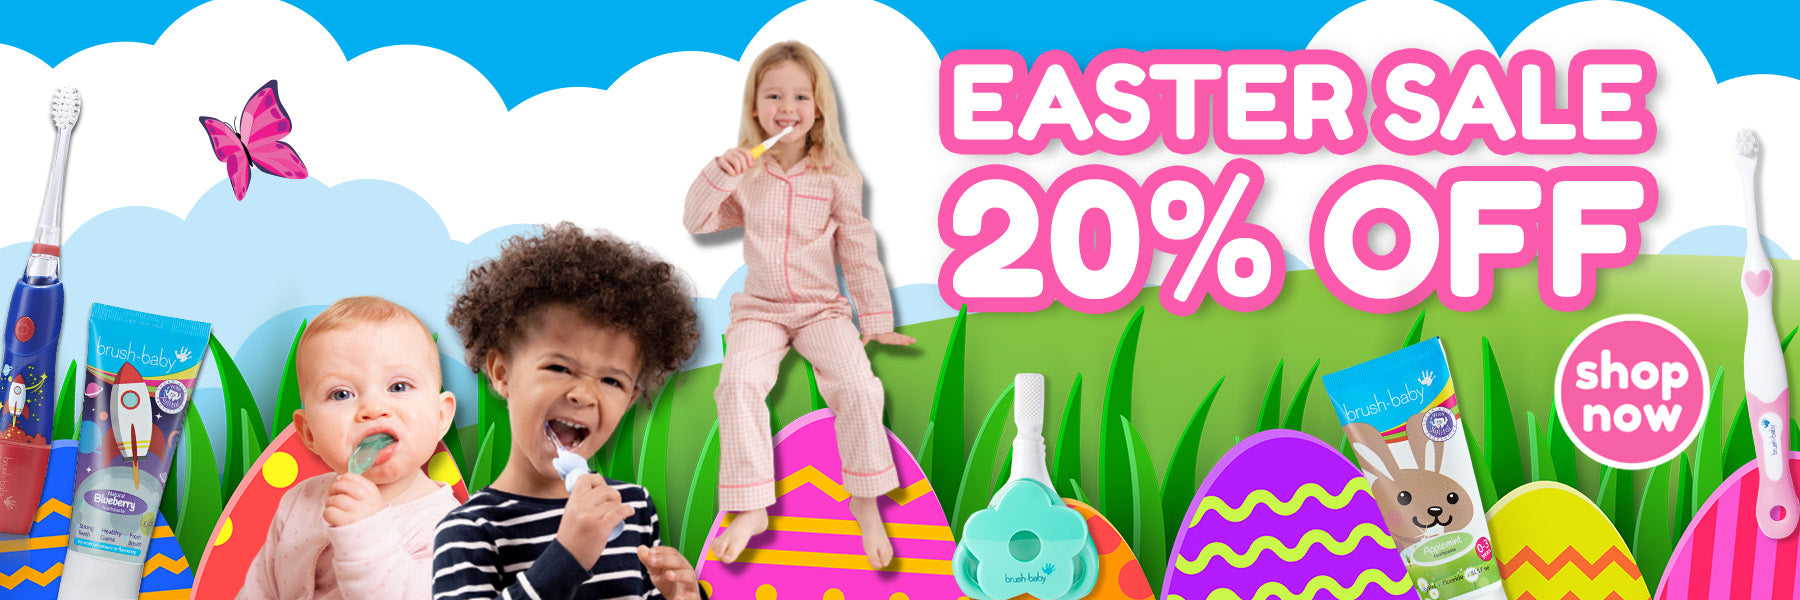 20% Easter Sale on Kids Toothbrushes